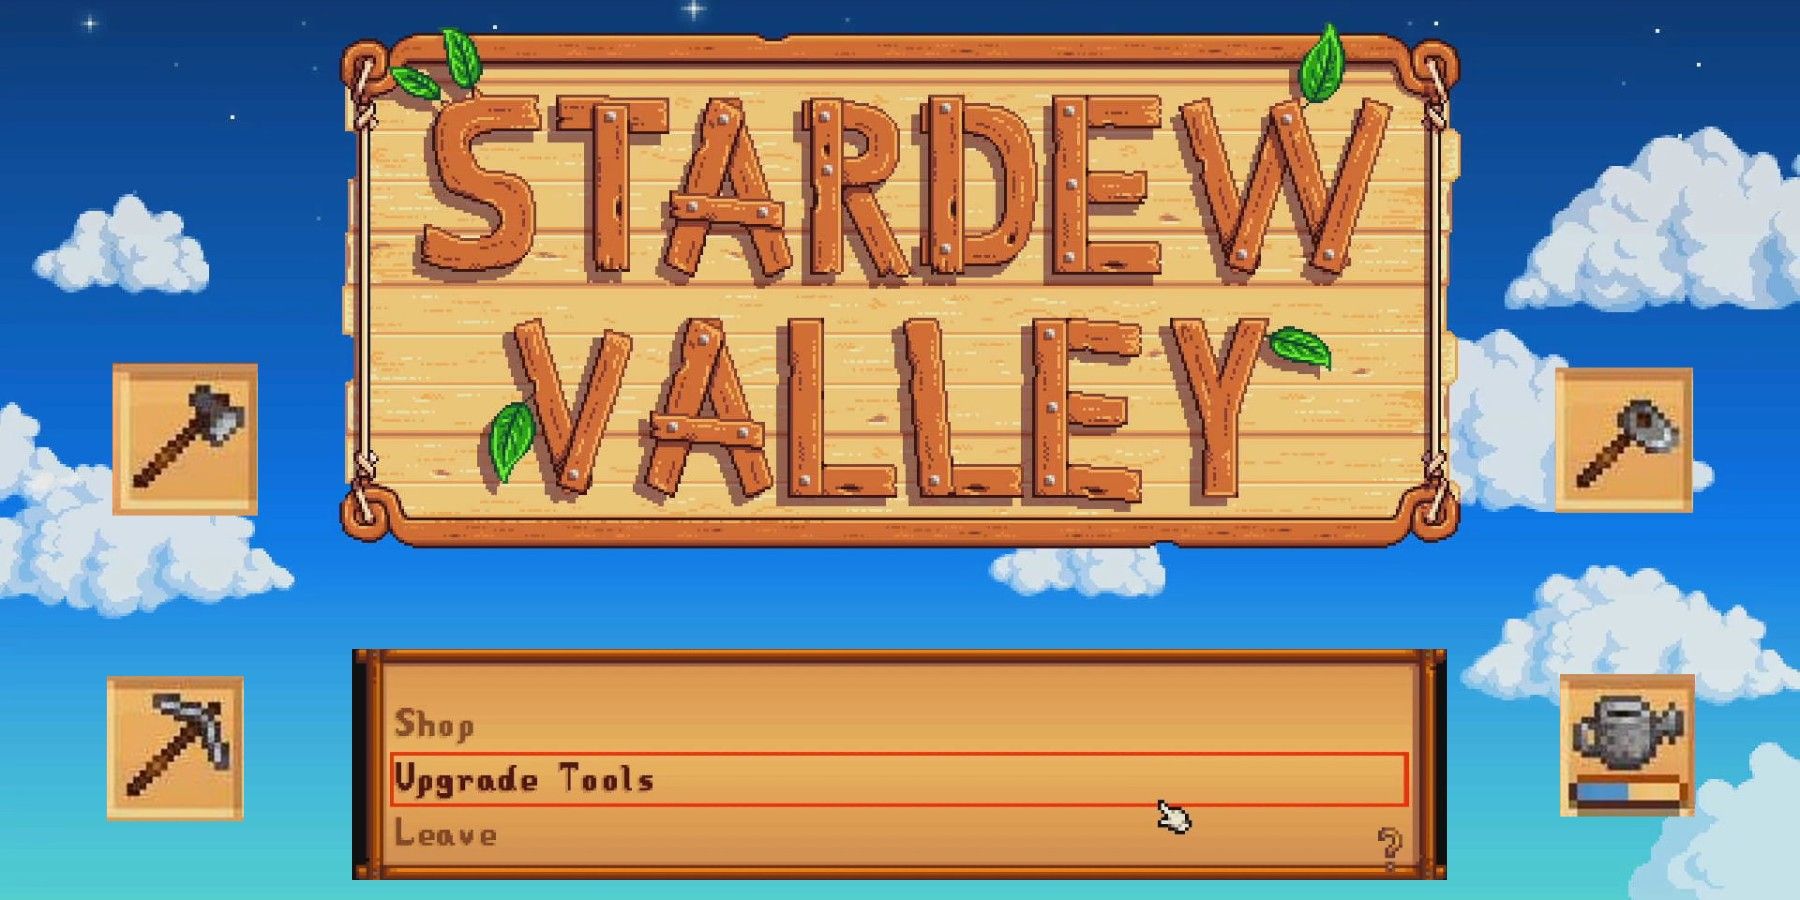 How To Upgrade Tools In Stardew Valley